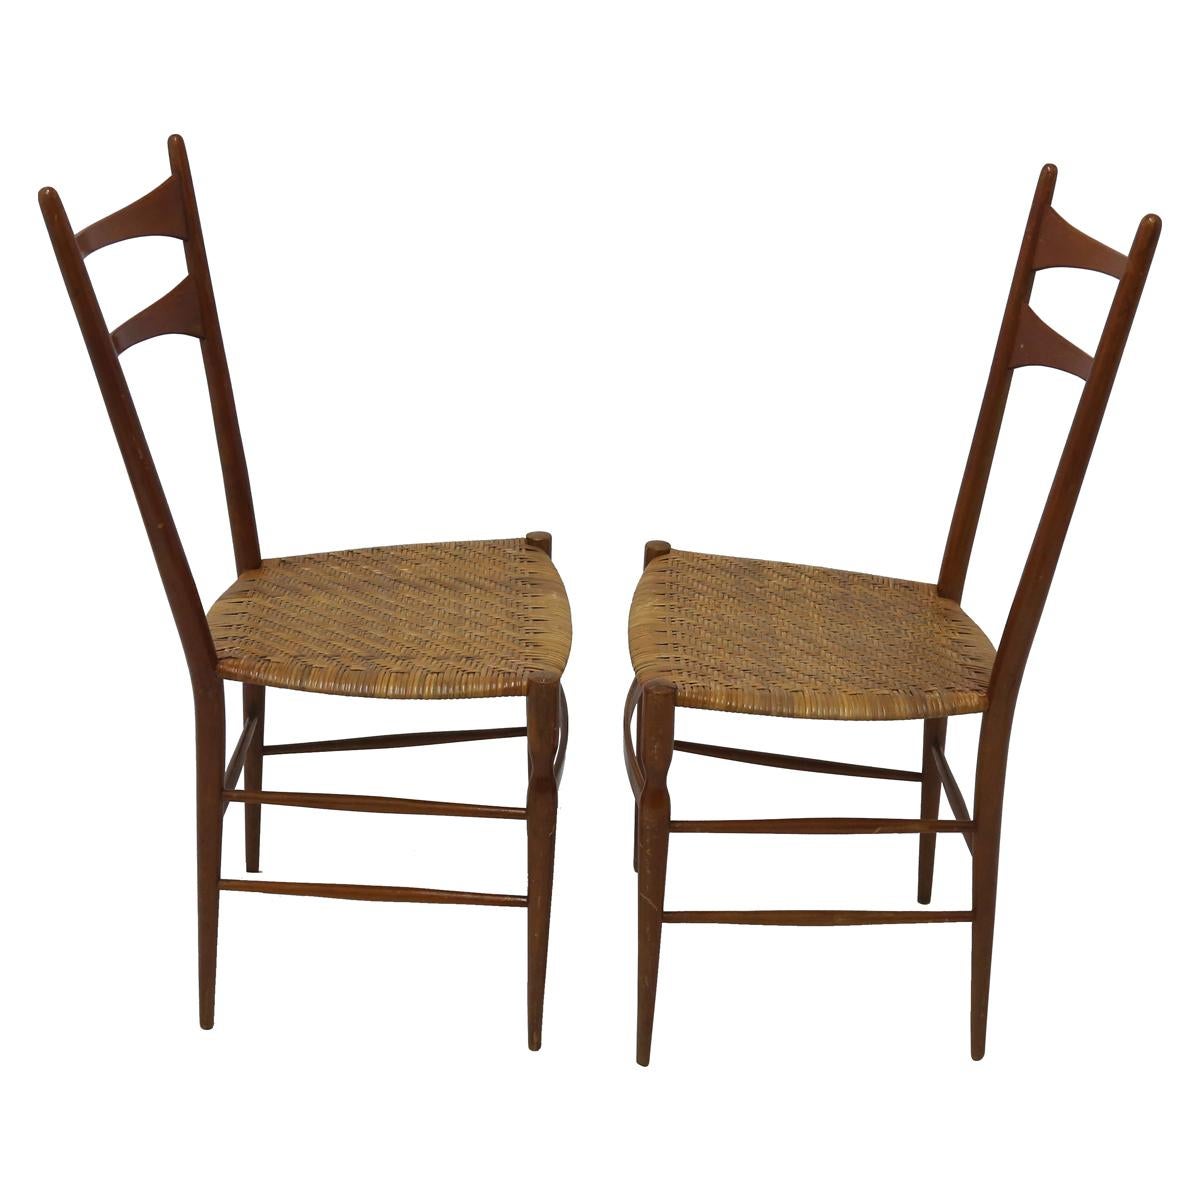 Mid-Century Modern Pair of Ladder Back Chairs with Woven Rattan Seats in the Manner of Gio Ponti